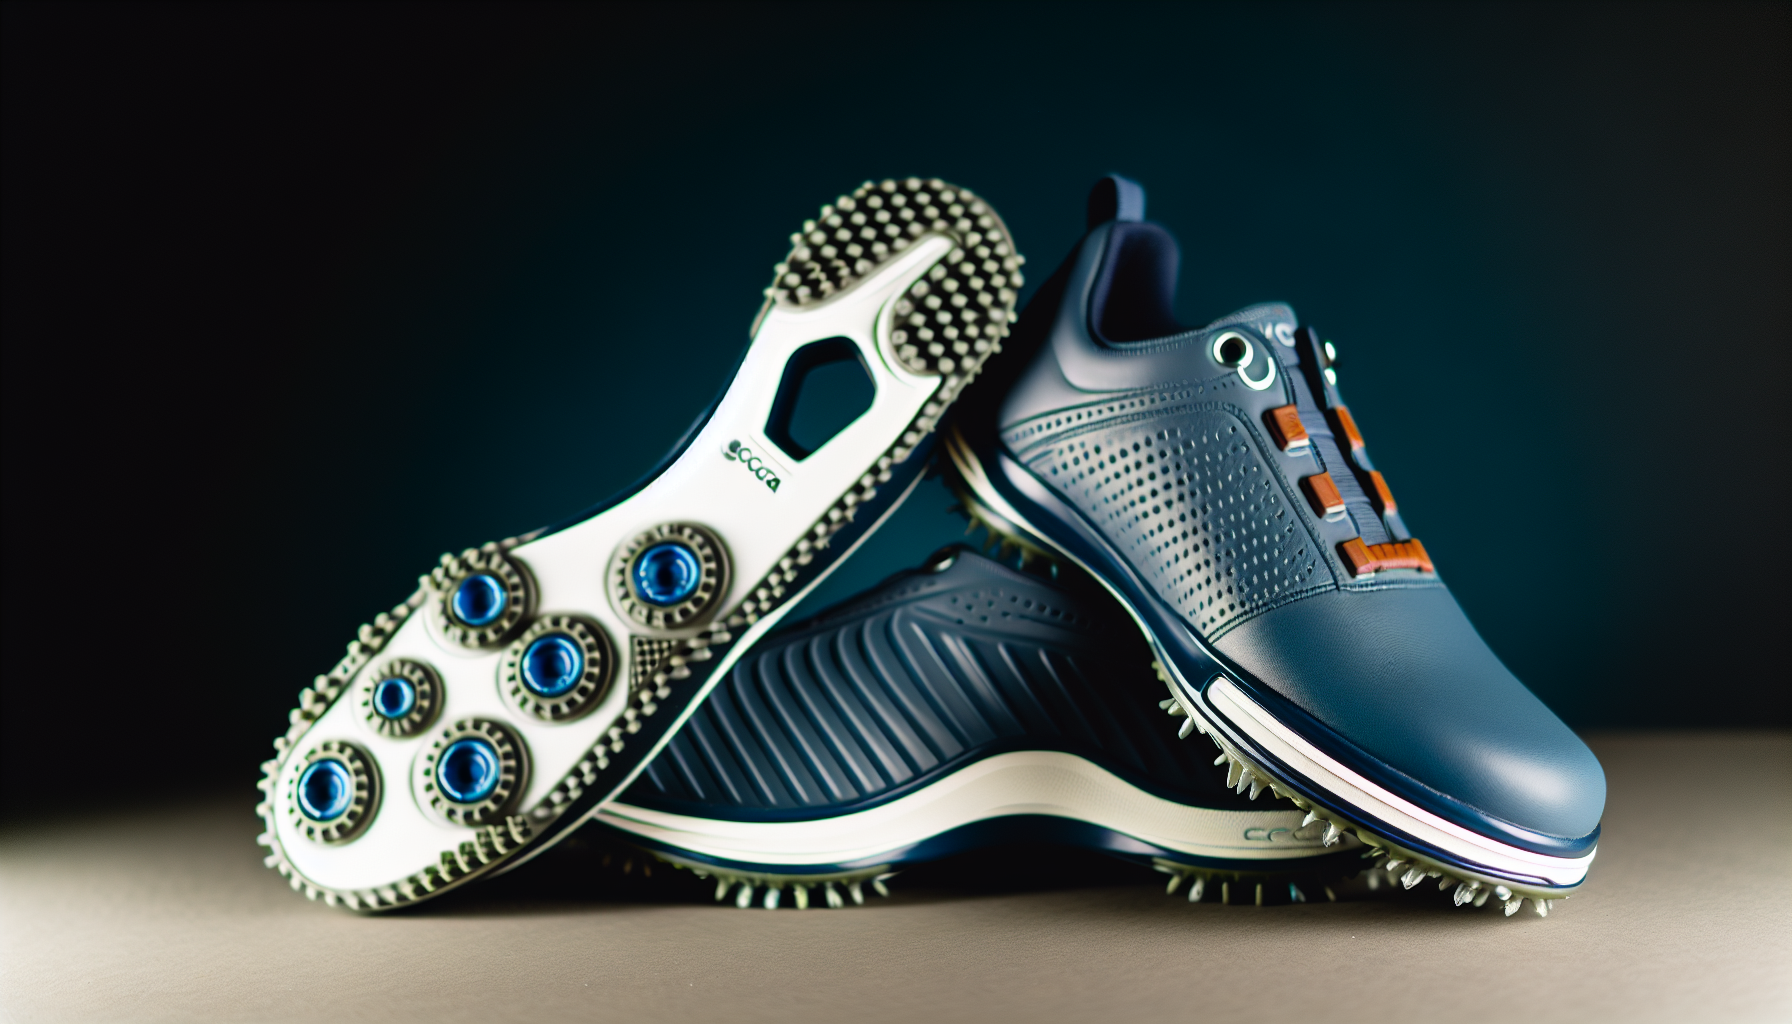 Ecco M Golf Biom G5 Golf Shoes with Boa technology